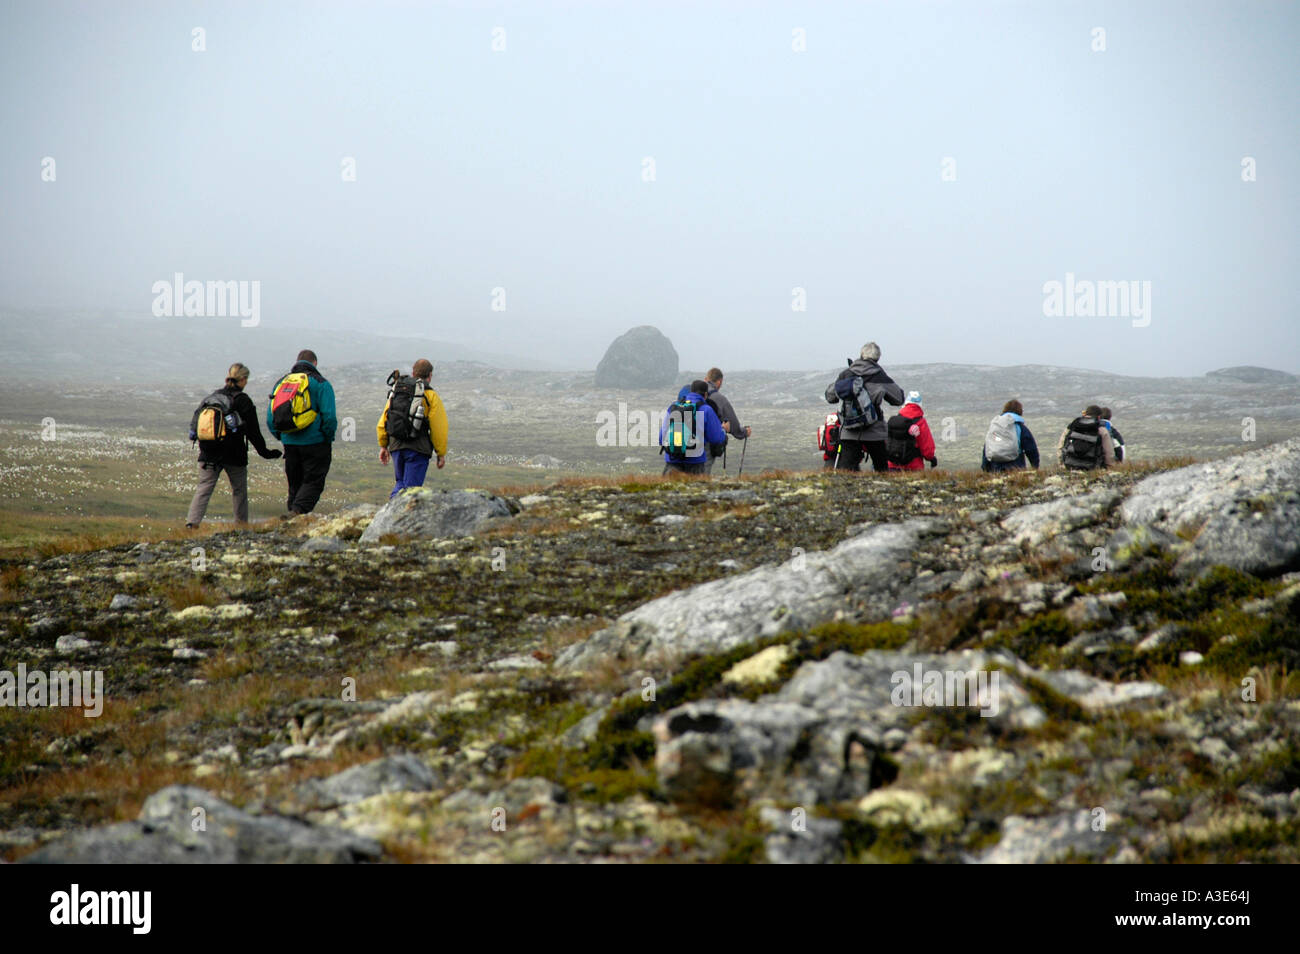 Hiking group hikes through swamp area into mist Eastgreenland Stock Photo